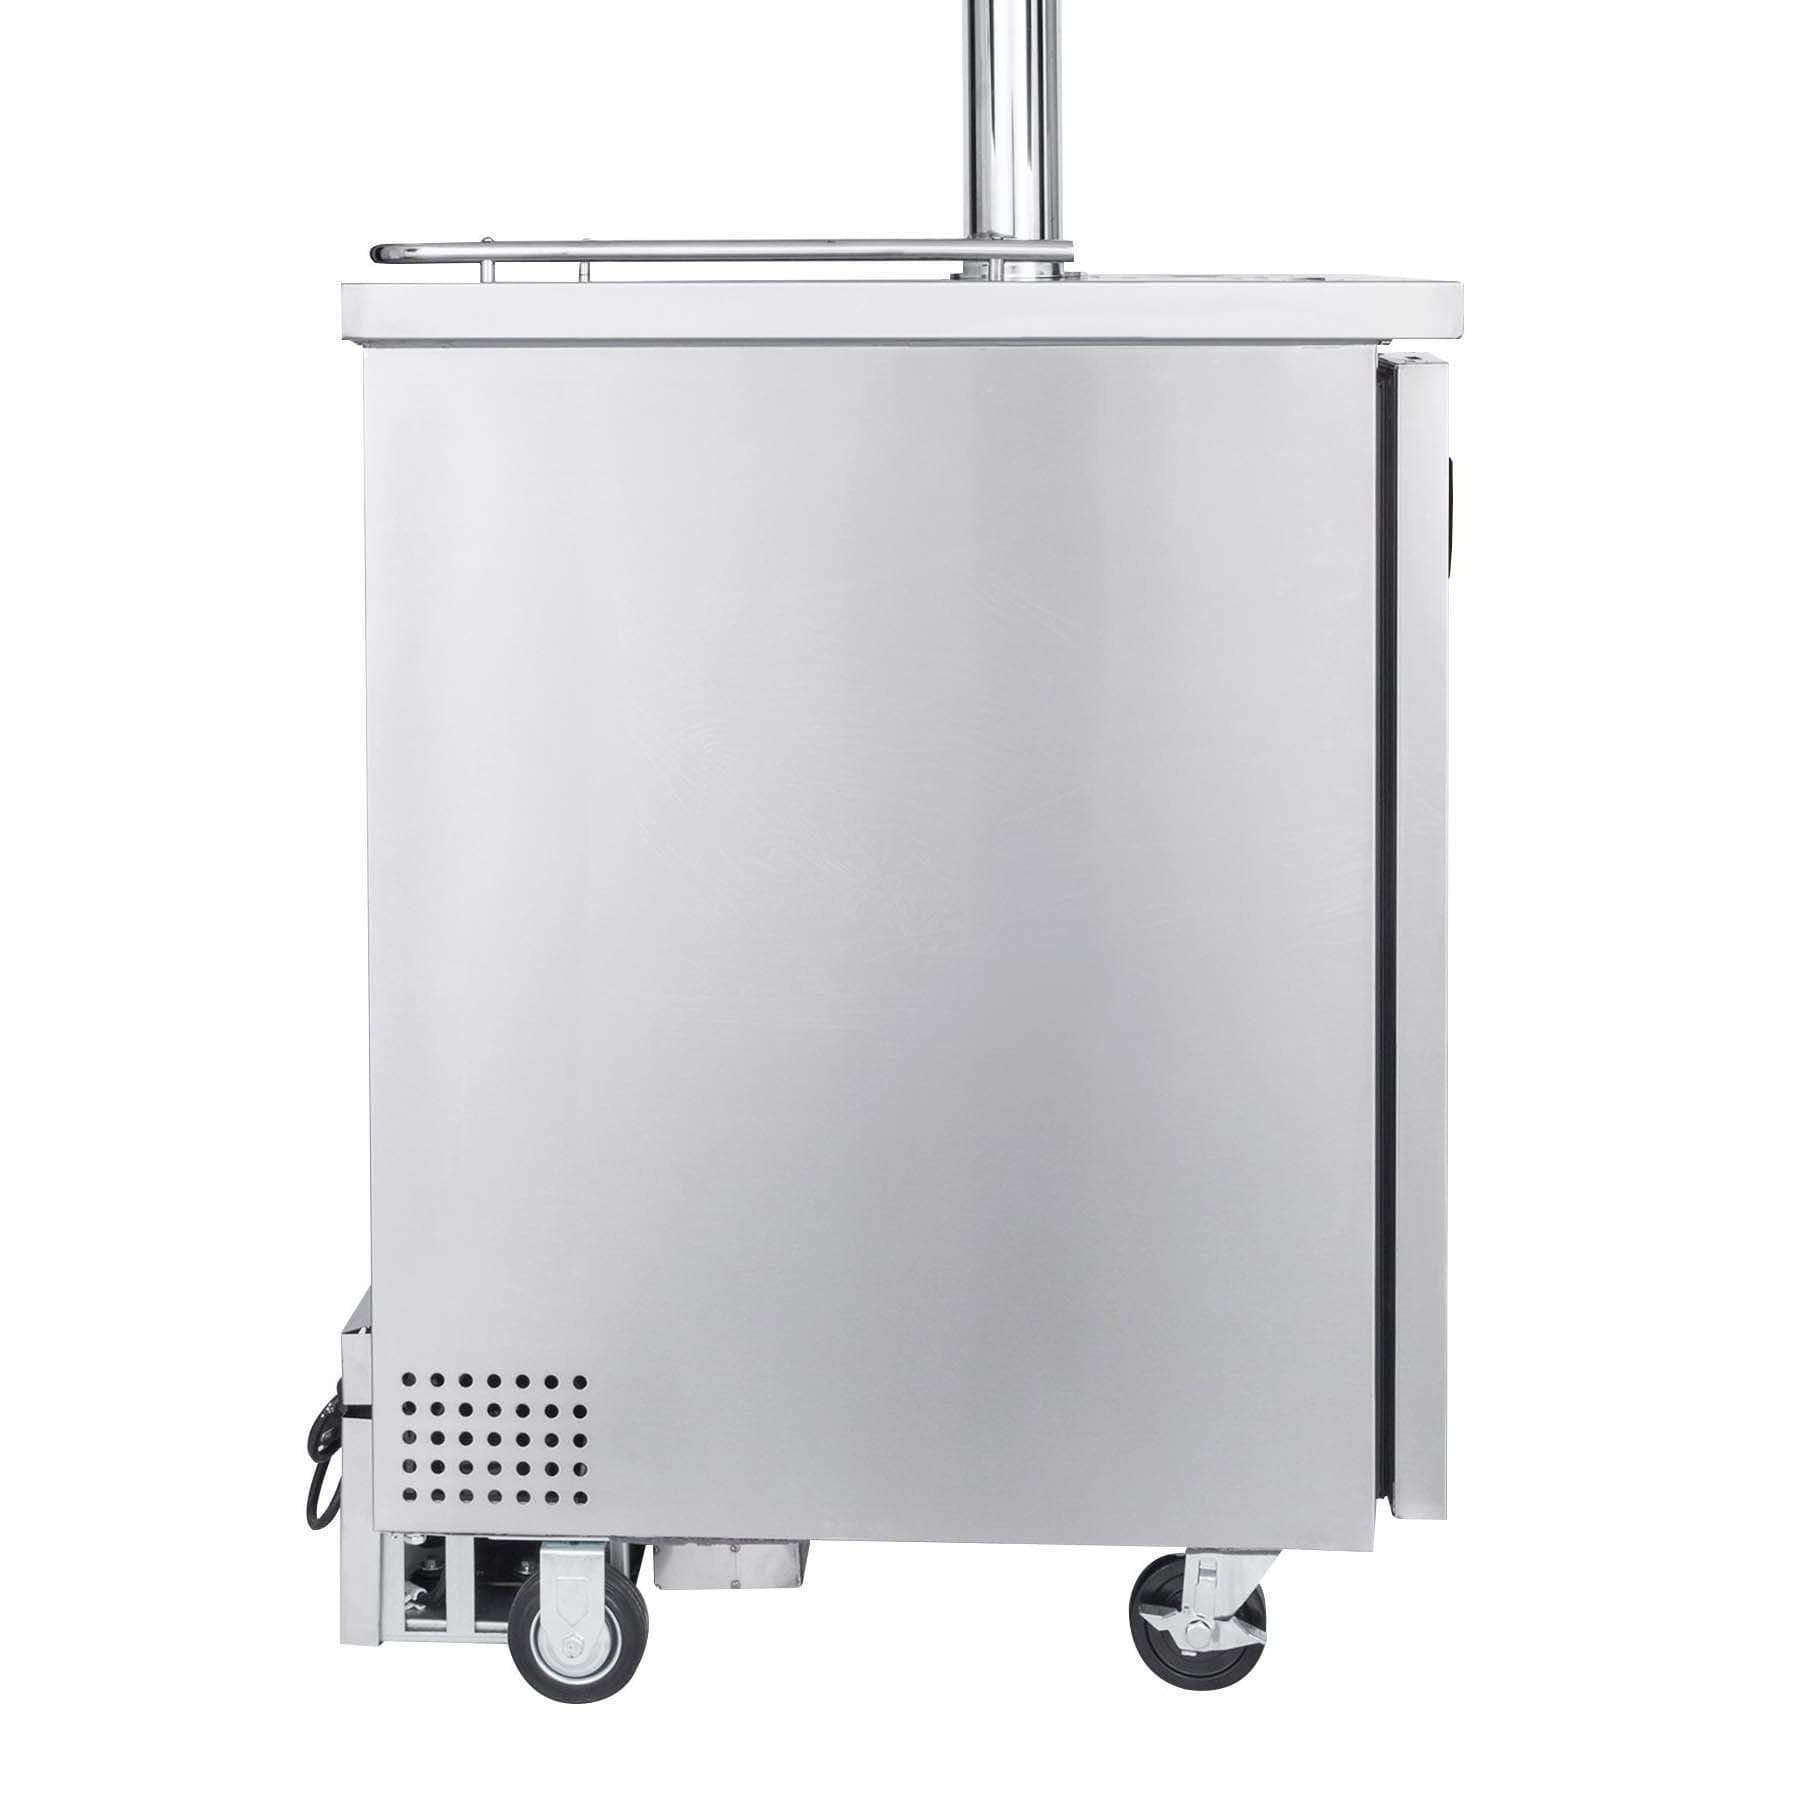 Kegco 24" Wide Cold Brew Coffee Triple Tap All Stainless Steel Kegerator ICXCK-1S-3 Wine Coolers Empire